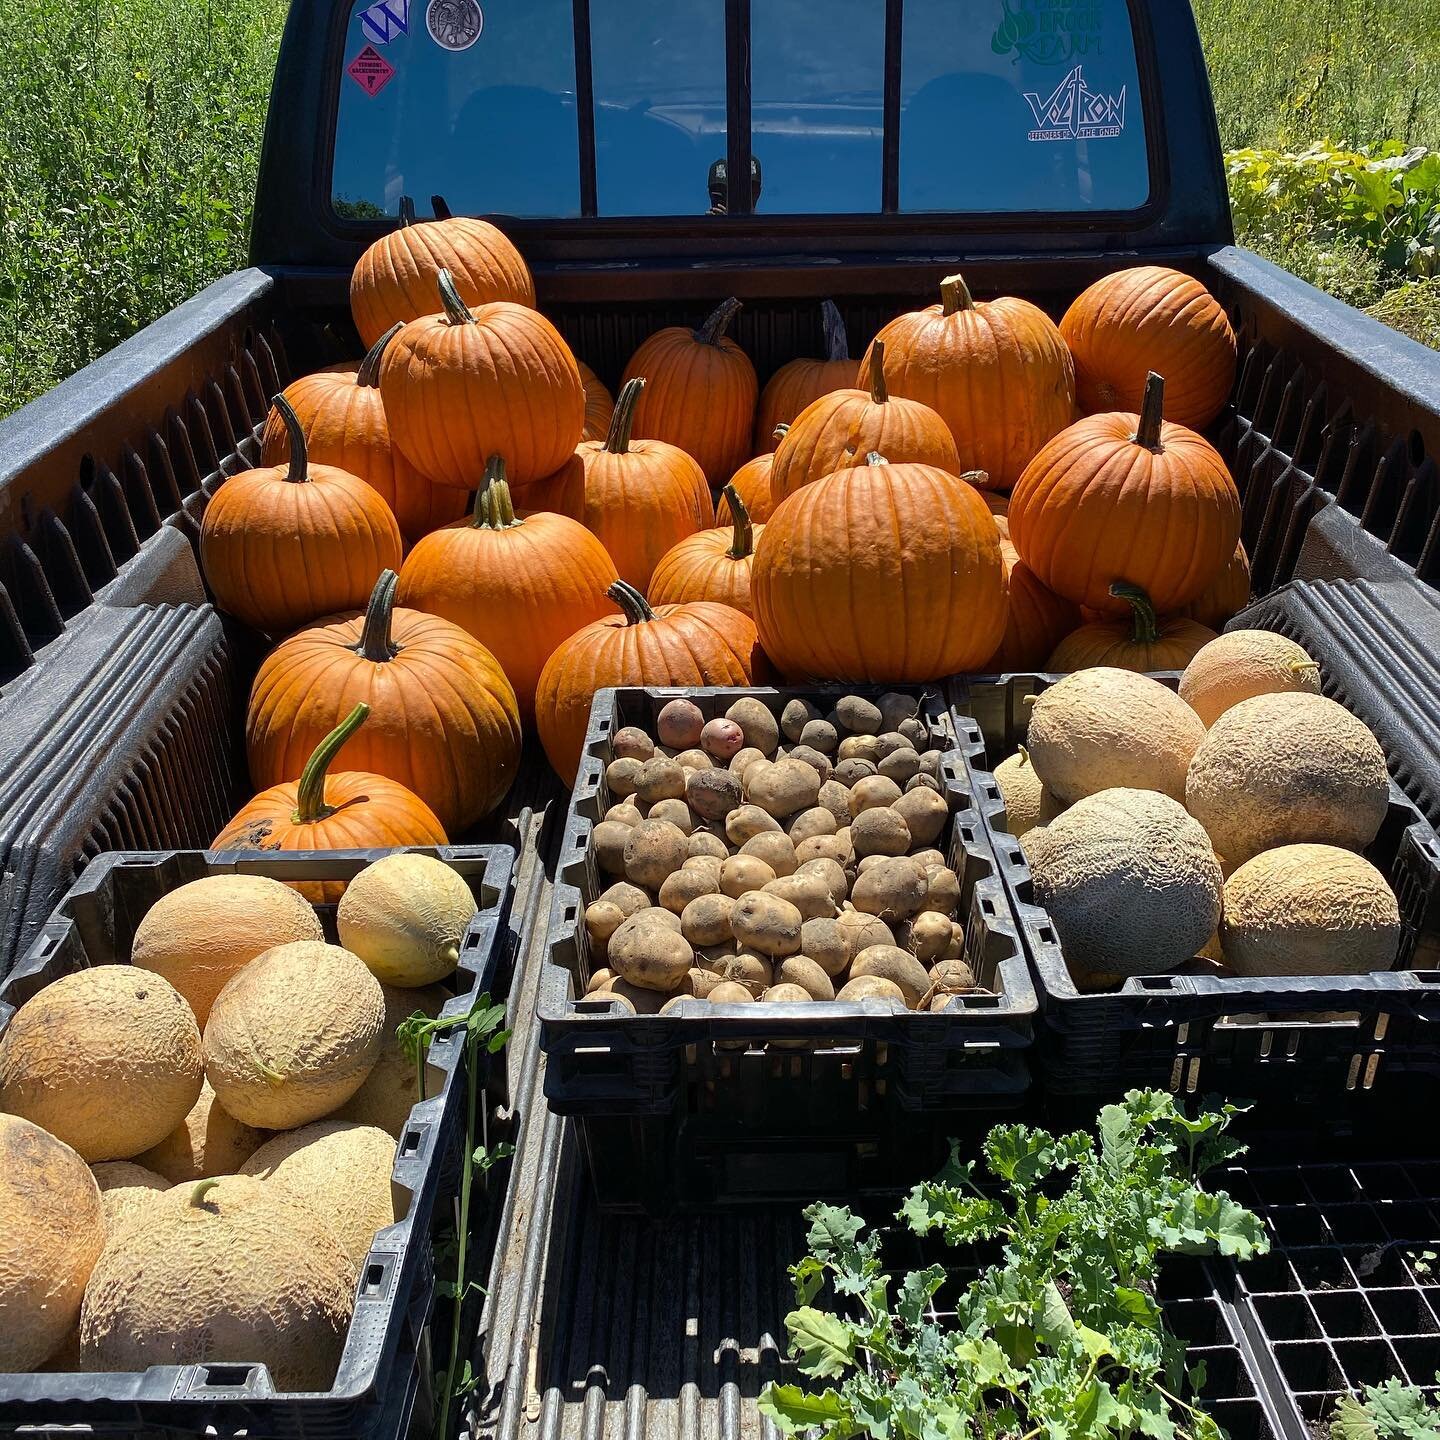 Melons, Taters and Pumpkins.... OH MY!!
.
.
#harvest #bounty #farmersbounty #knowyourfarmer #knowyourfood #melons #cantaloupe #potato #pumpkin #voltron